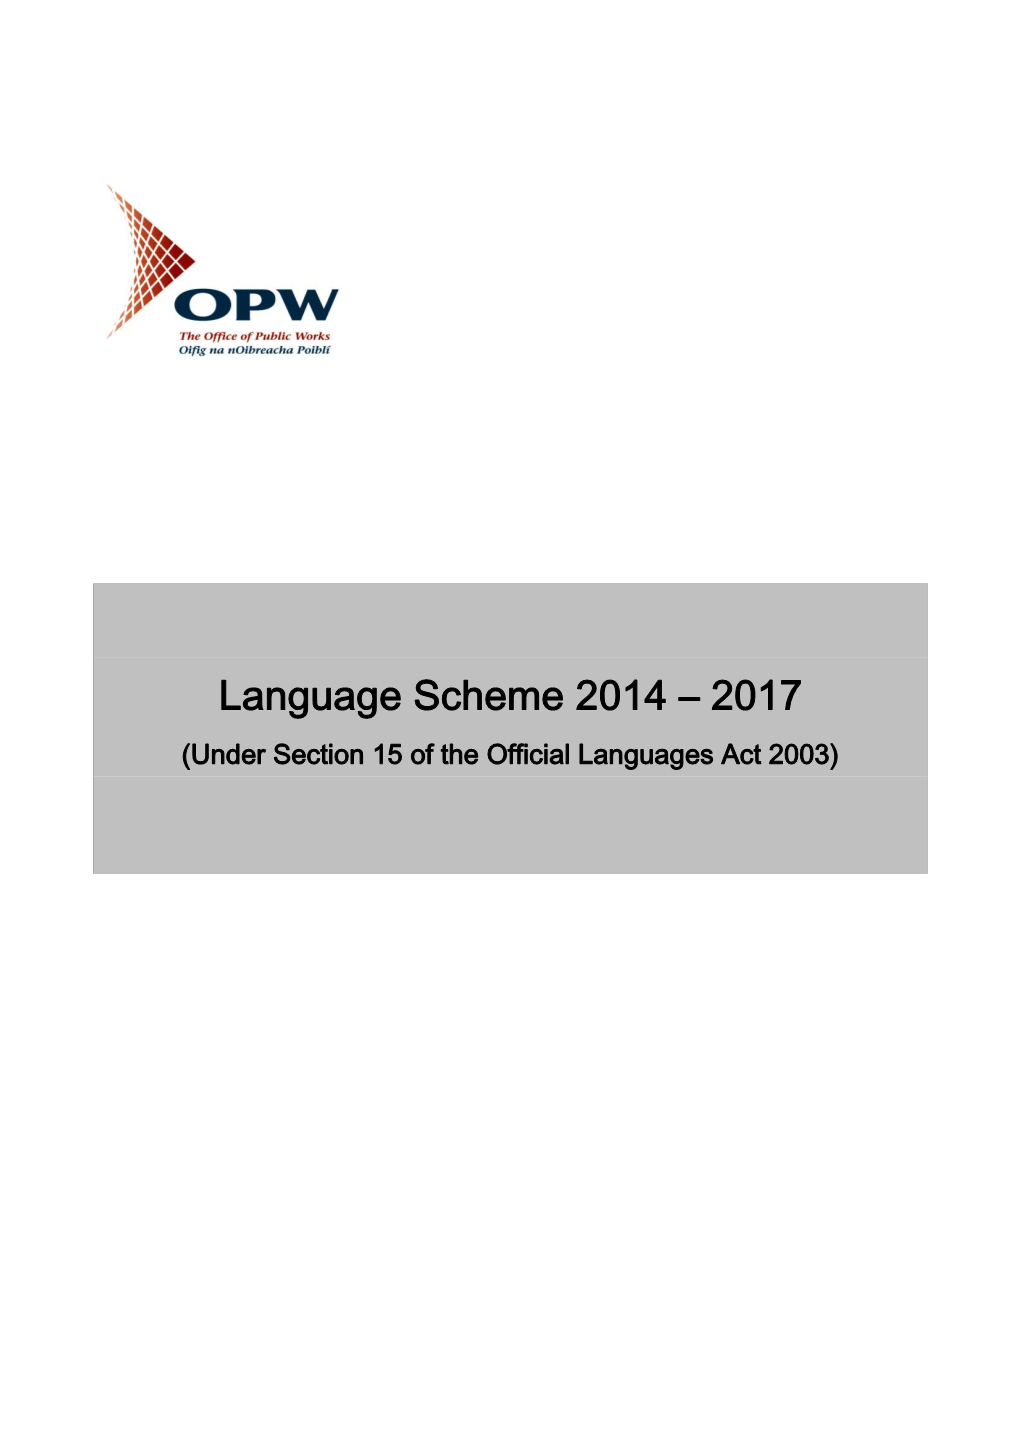 Language Scheme 2014 – 2017 (Under Section 15 of the Official Languages Act 2003)